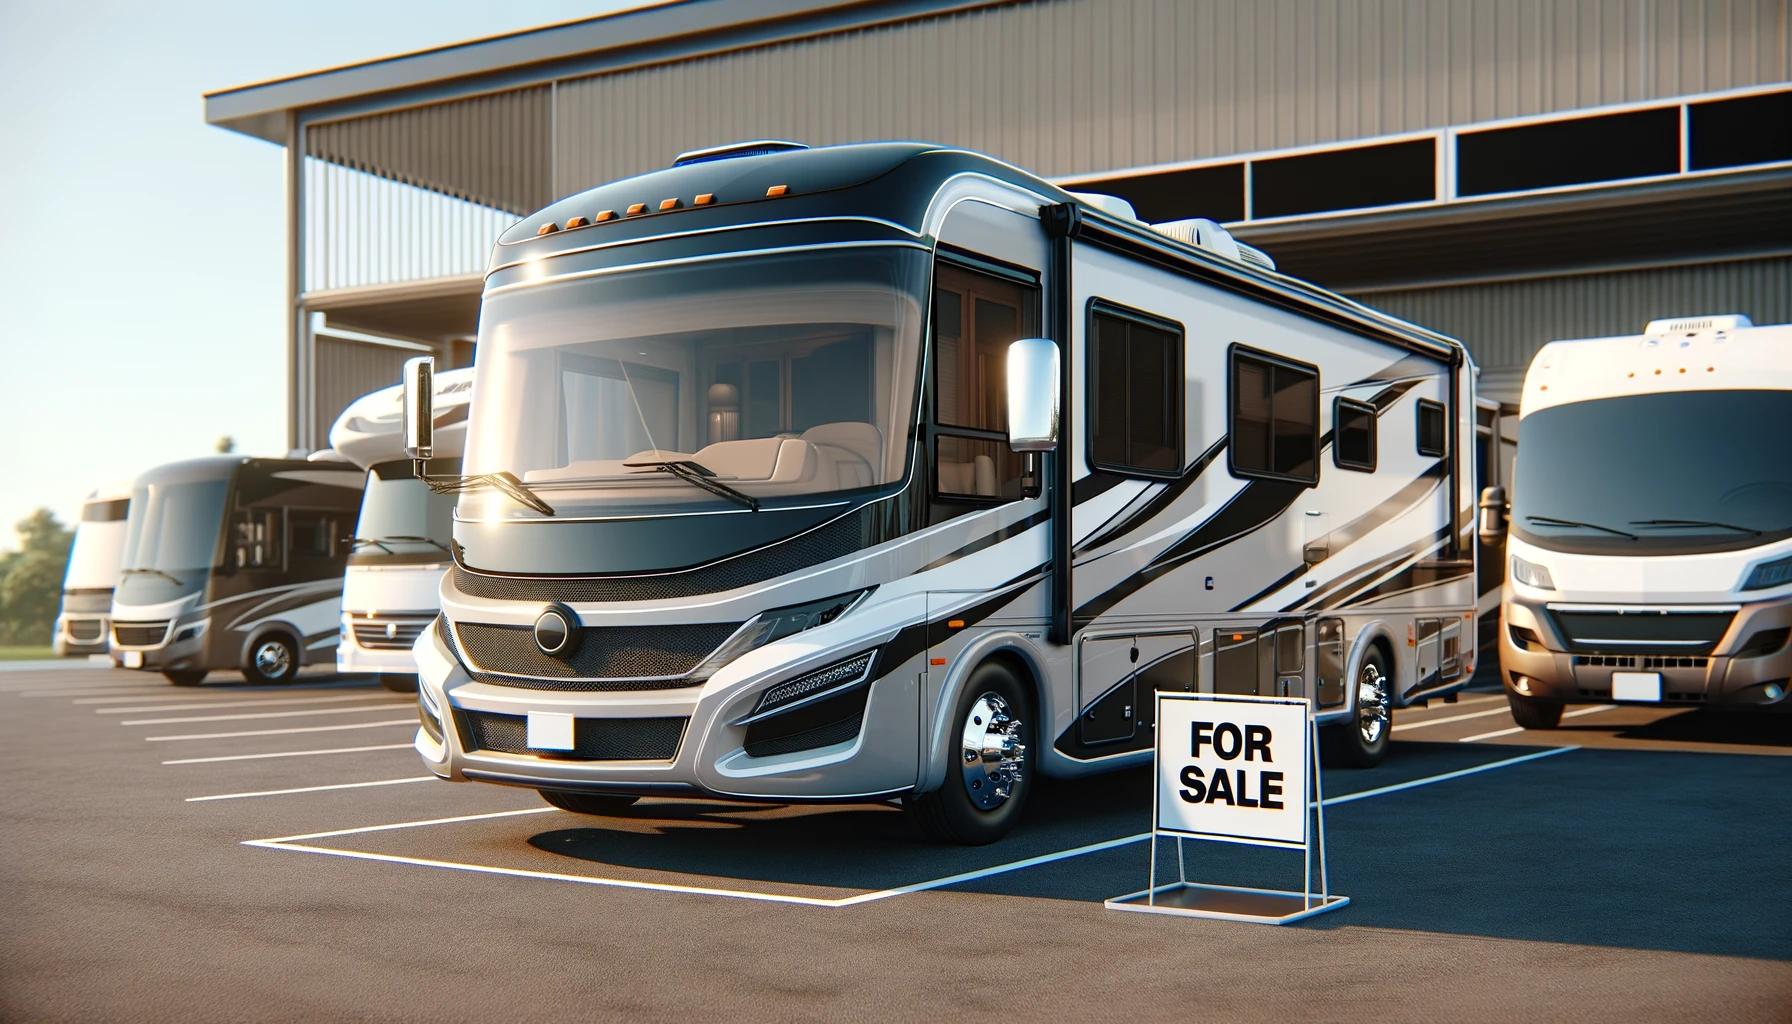 How to Save Money Buying a New RV: Tips from an RV Industry Pro